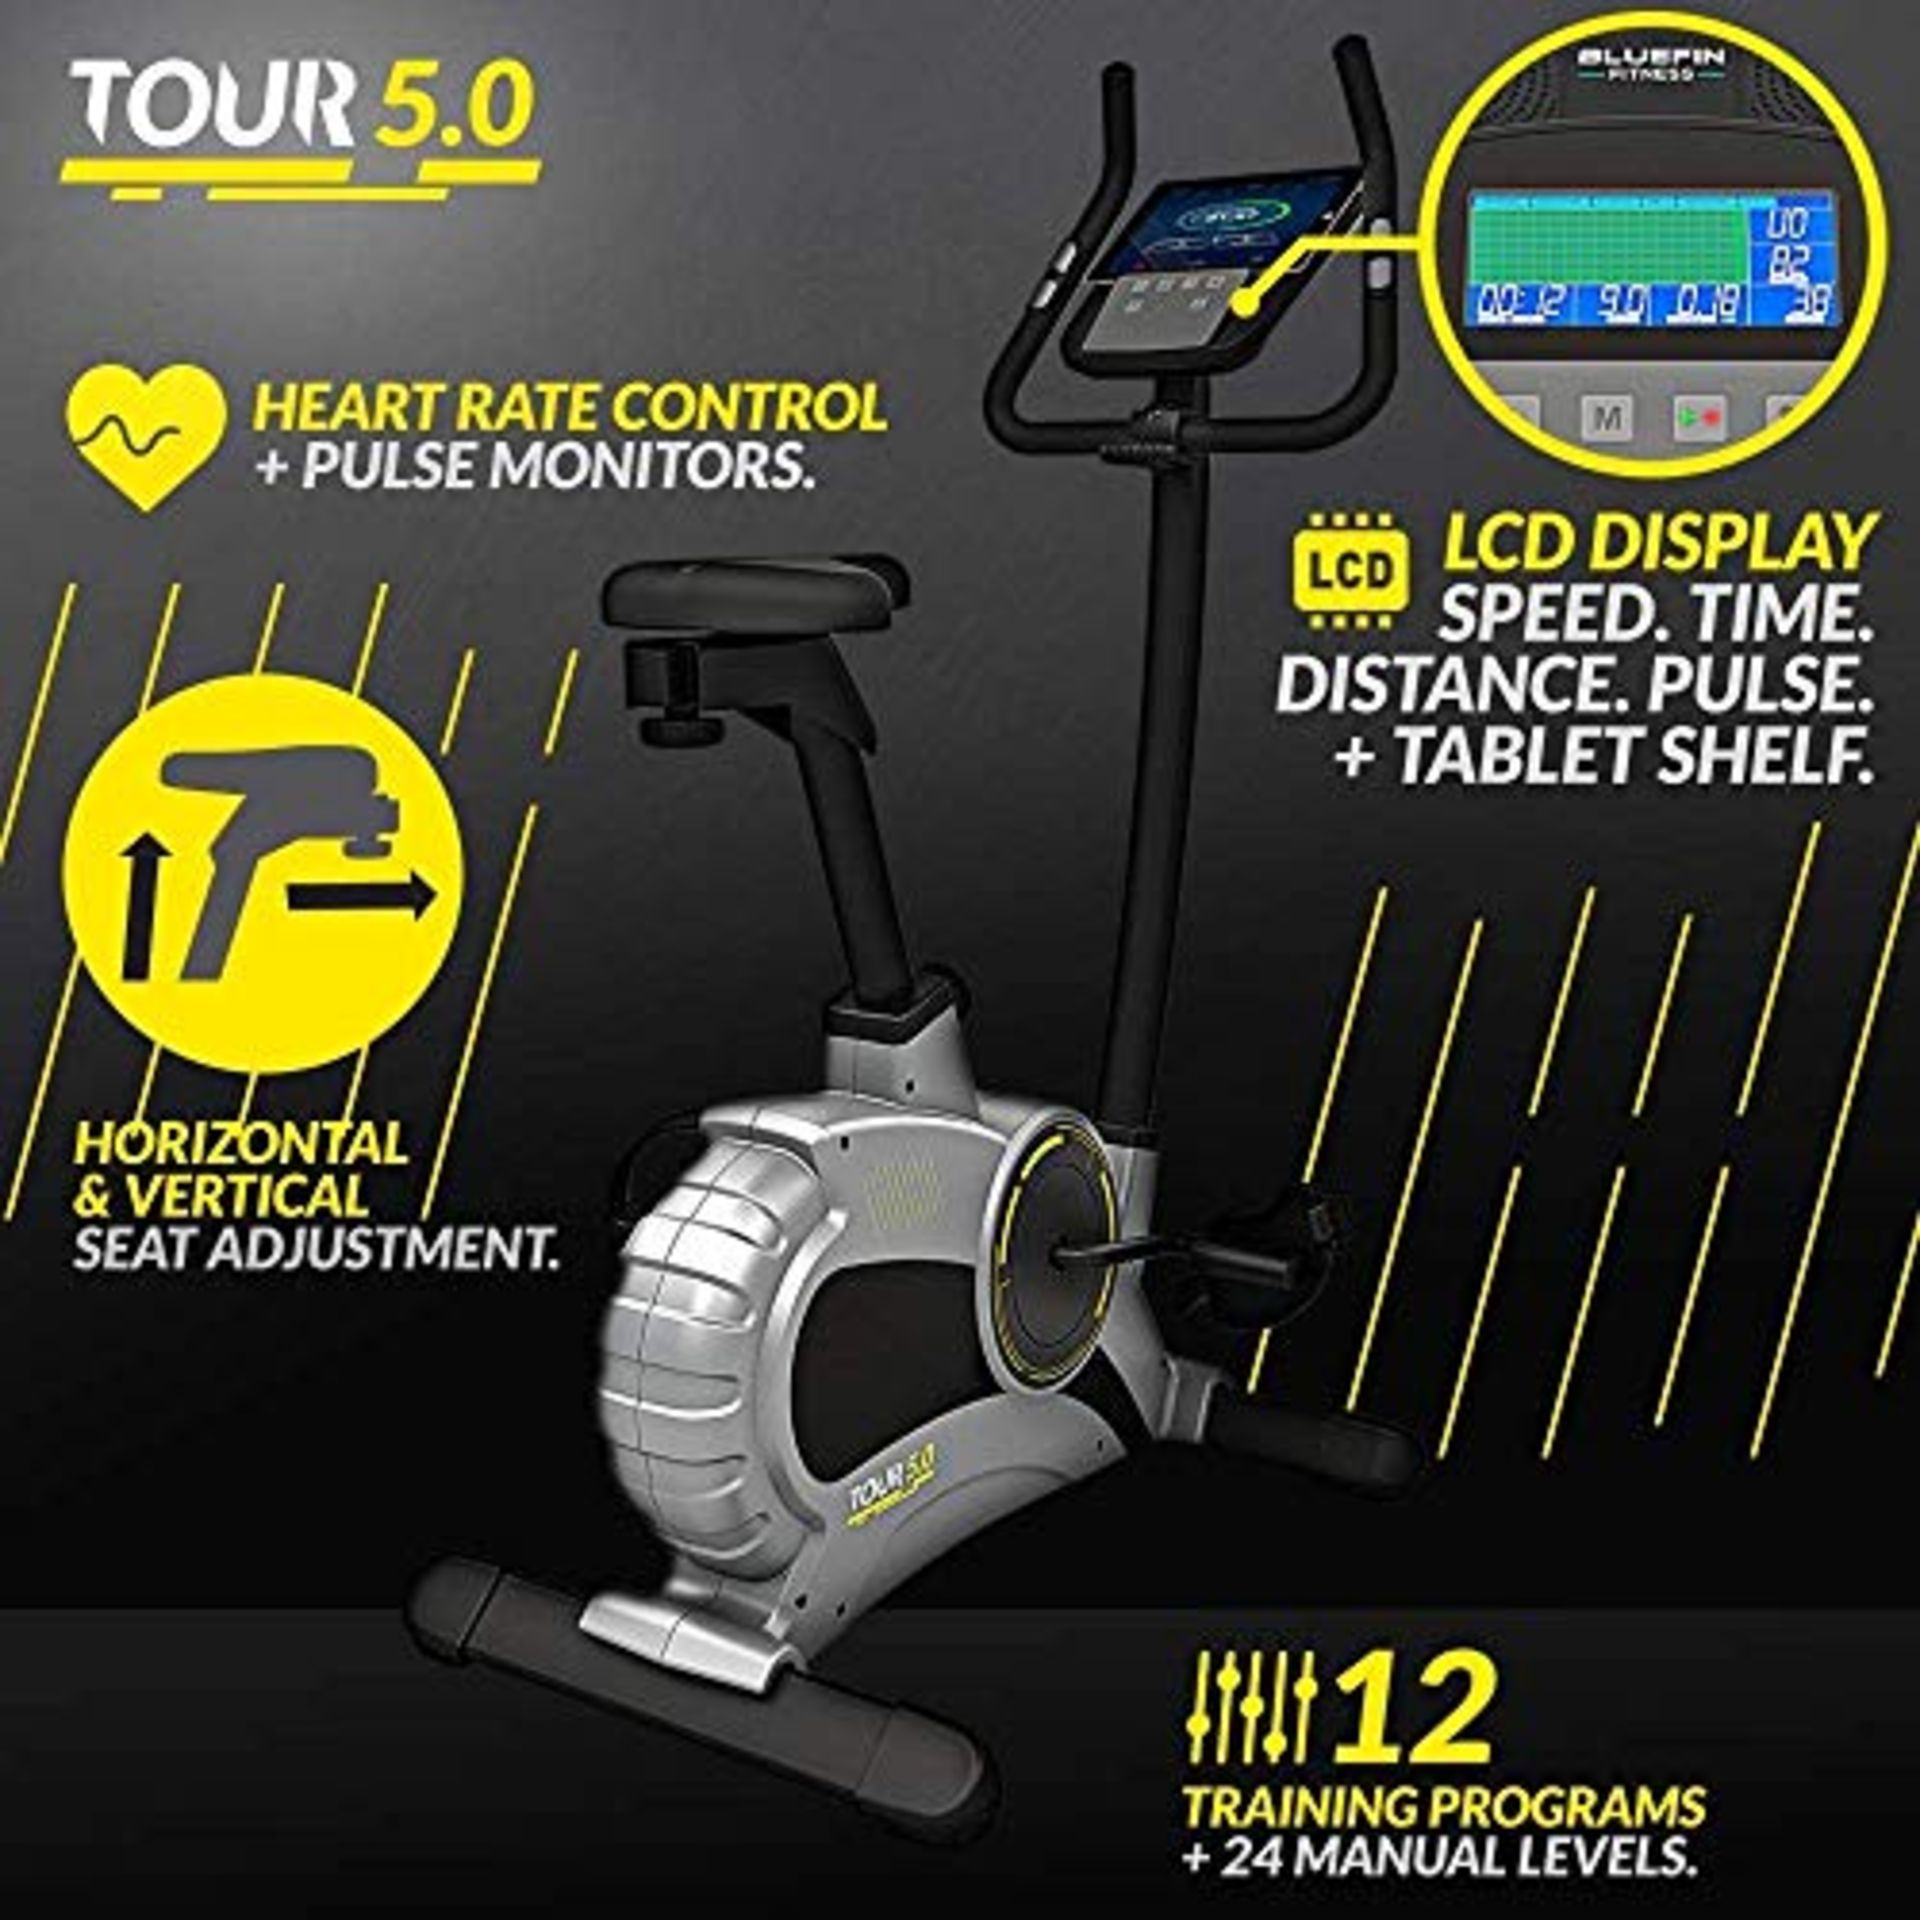 BLUEFIN FITNESS TOUR 5.0 RESISTANCE EXERCISE BIKE RRP £349.00 - Image 2 of 3